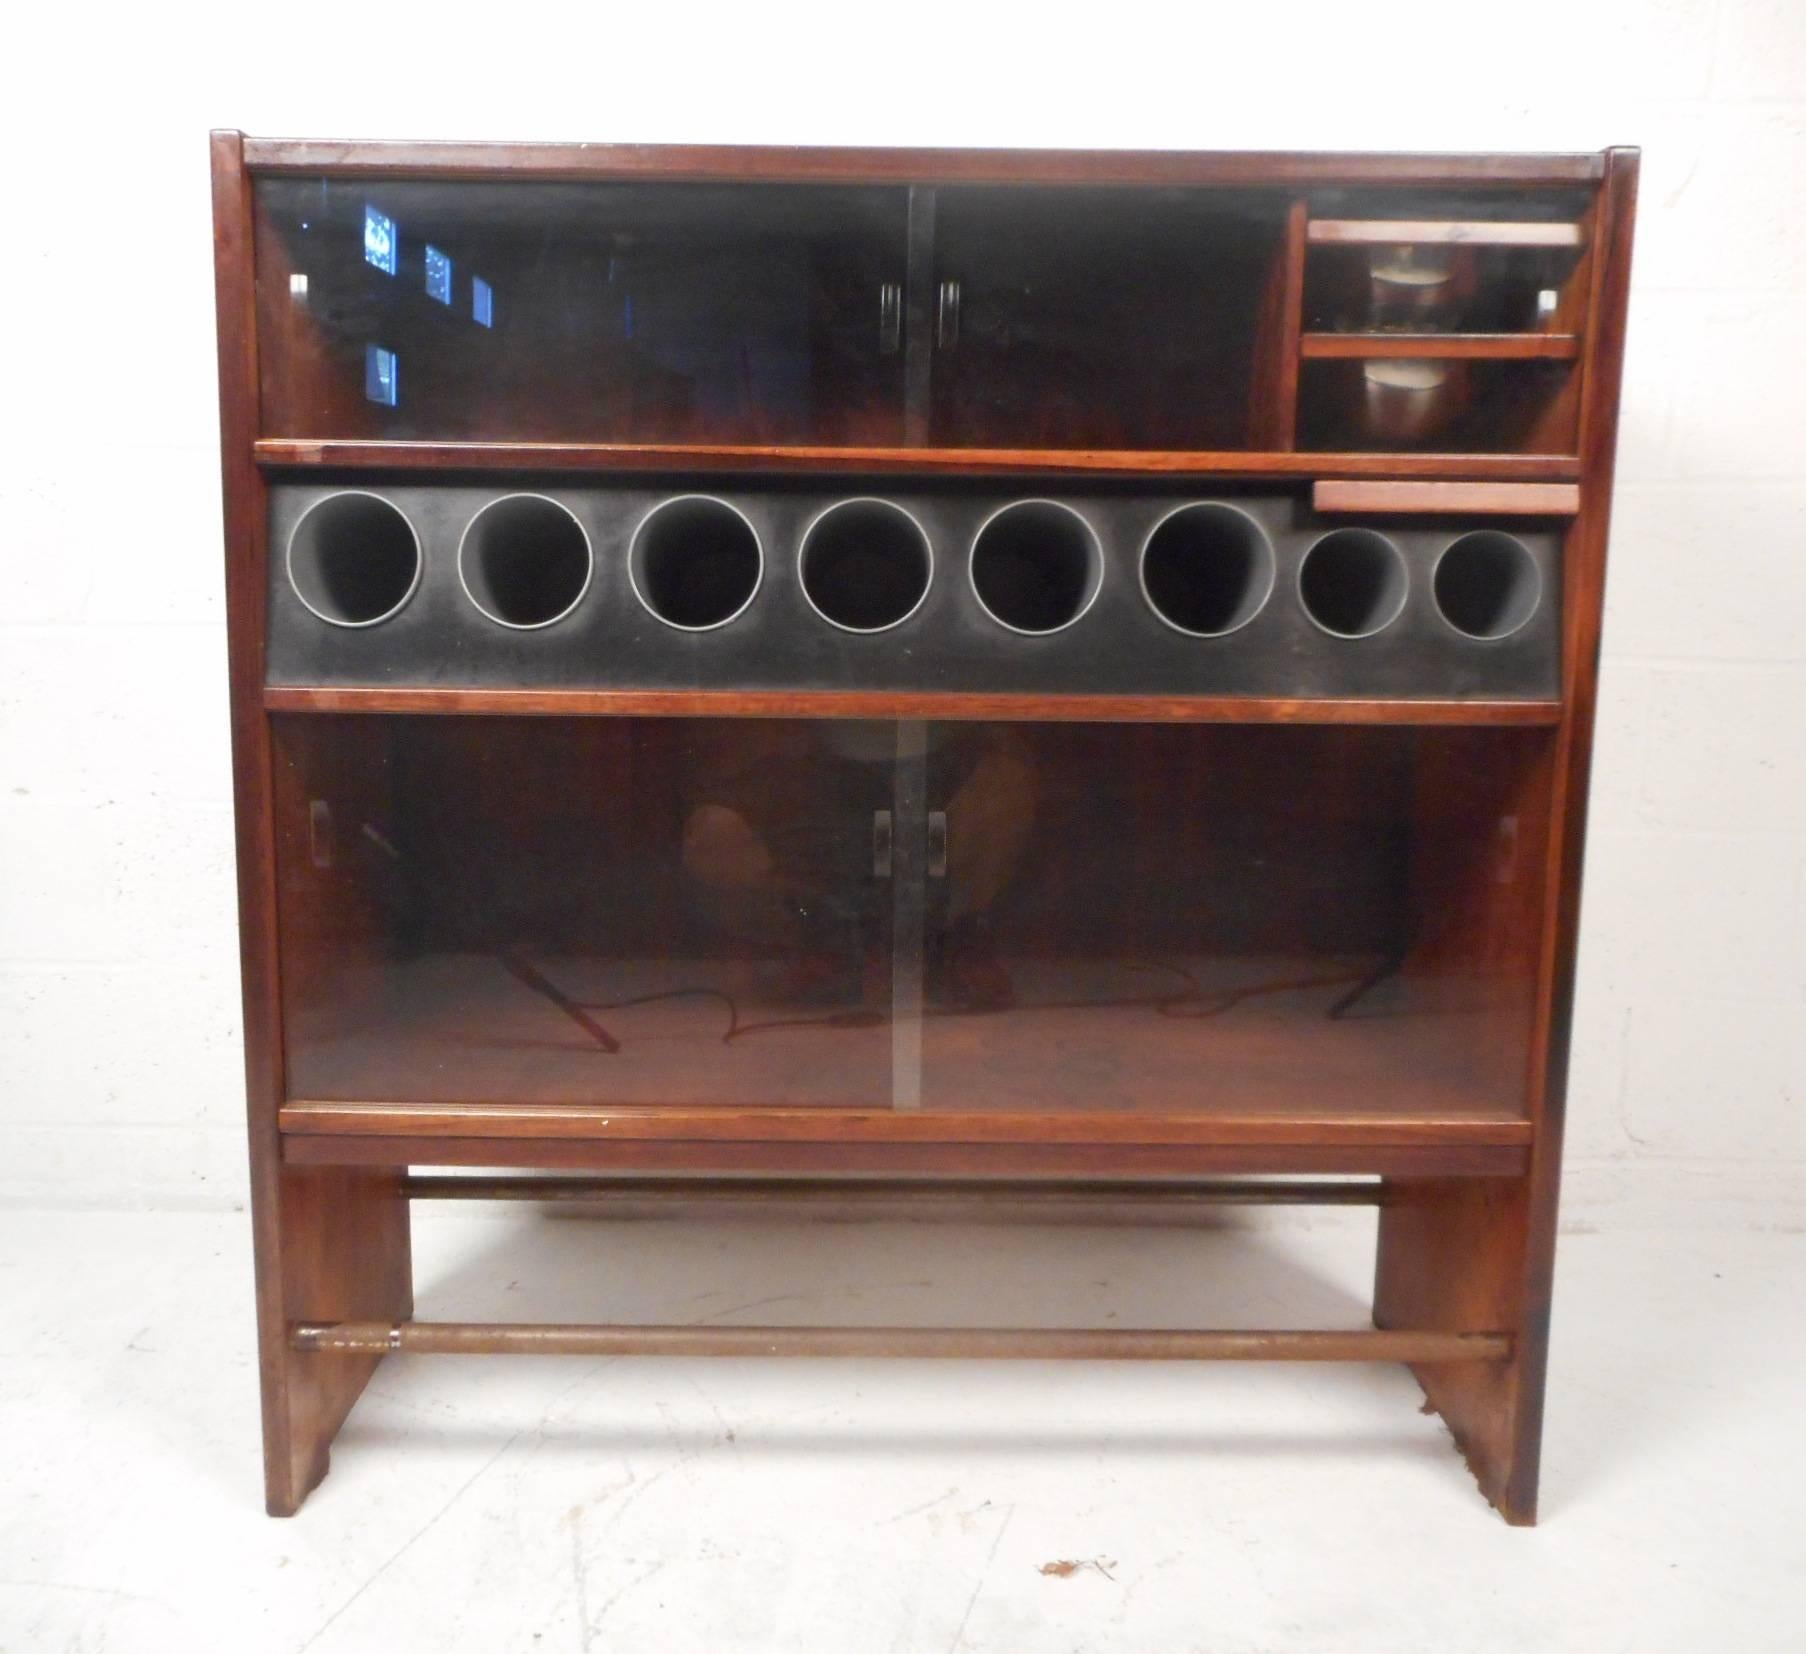 This beautiful vintage modern bar features a leather top and sliding glass doors. Sleek design with bottle holders, hidden ice buckets, and storage compartments. Wonderful bar made of rosewood with a metal kick rest on the bottom of each side. This